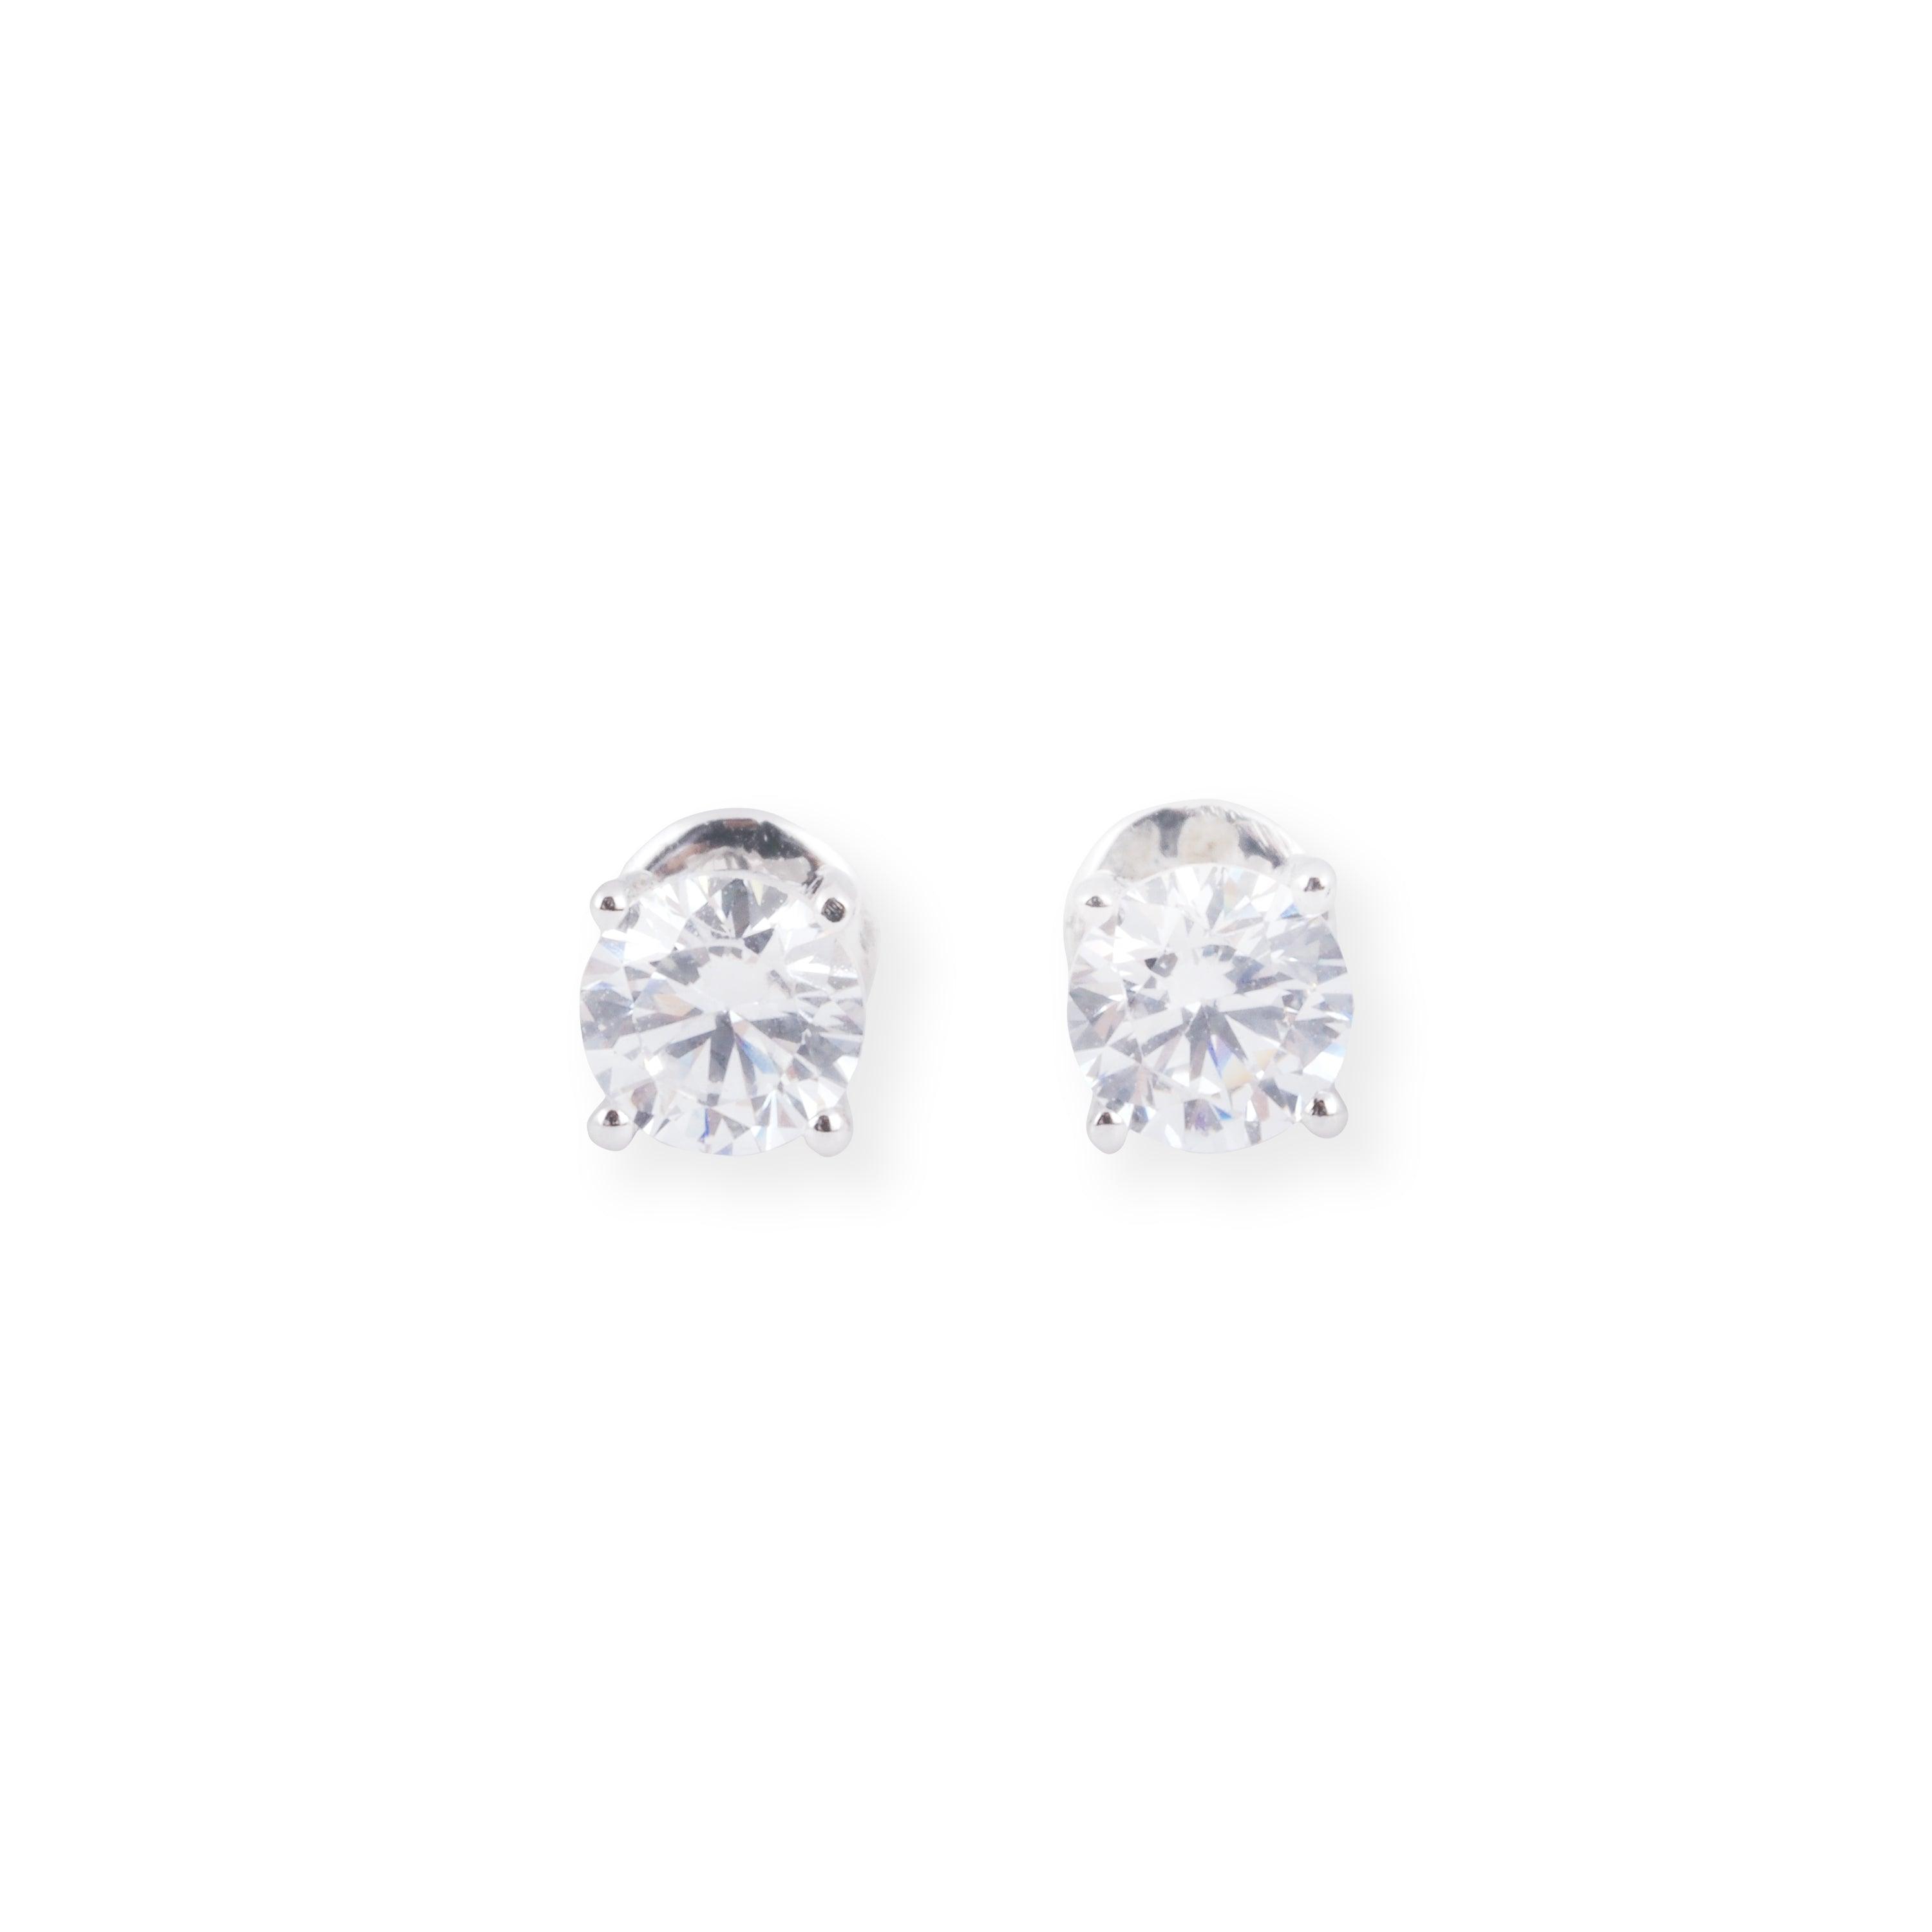 18ct White Gold Four Claw Cubic Zirconia Stud Earrings E-7659 - Minar Jewellers